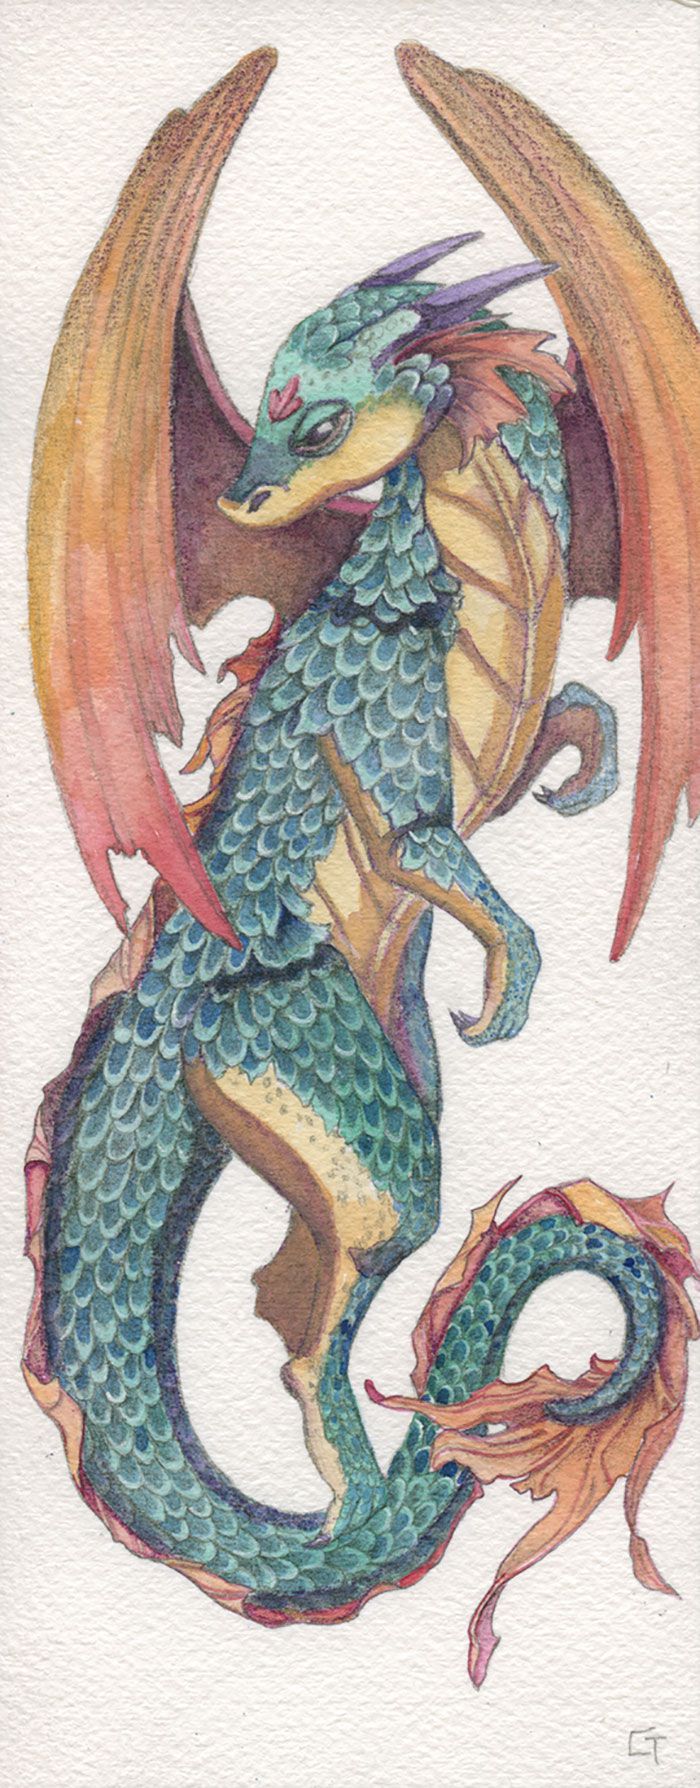 Unique And Wonderful Dragons Watercolors By Carrieann Truitt 7